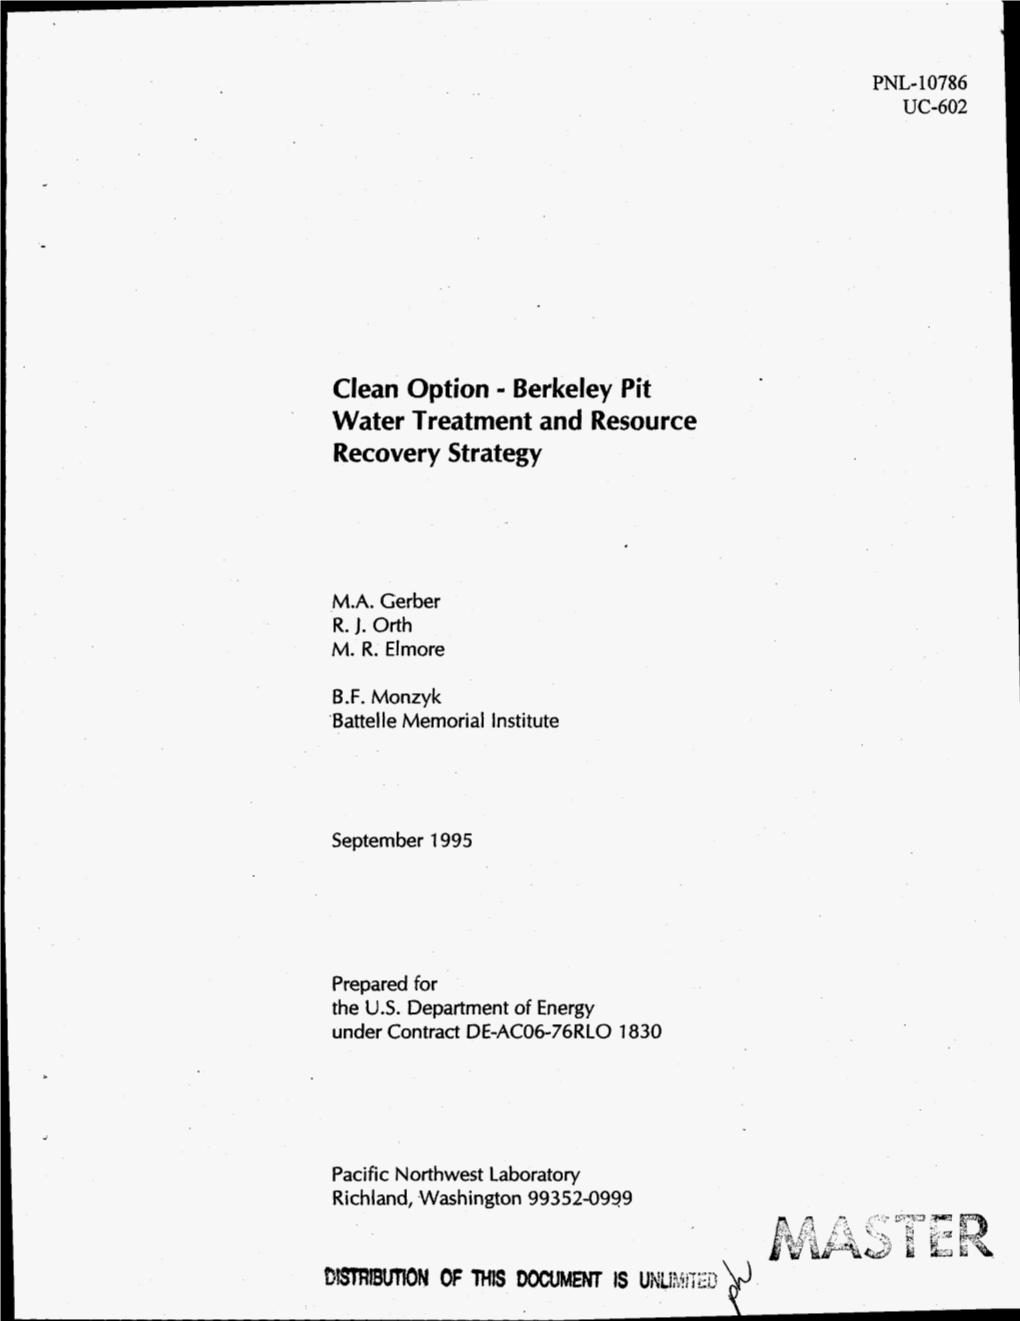 Berkeley Pit Water Treatment and Resource Recovery Strategy